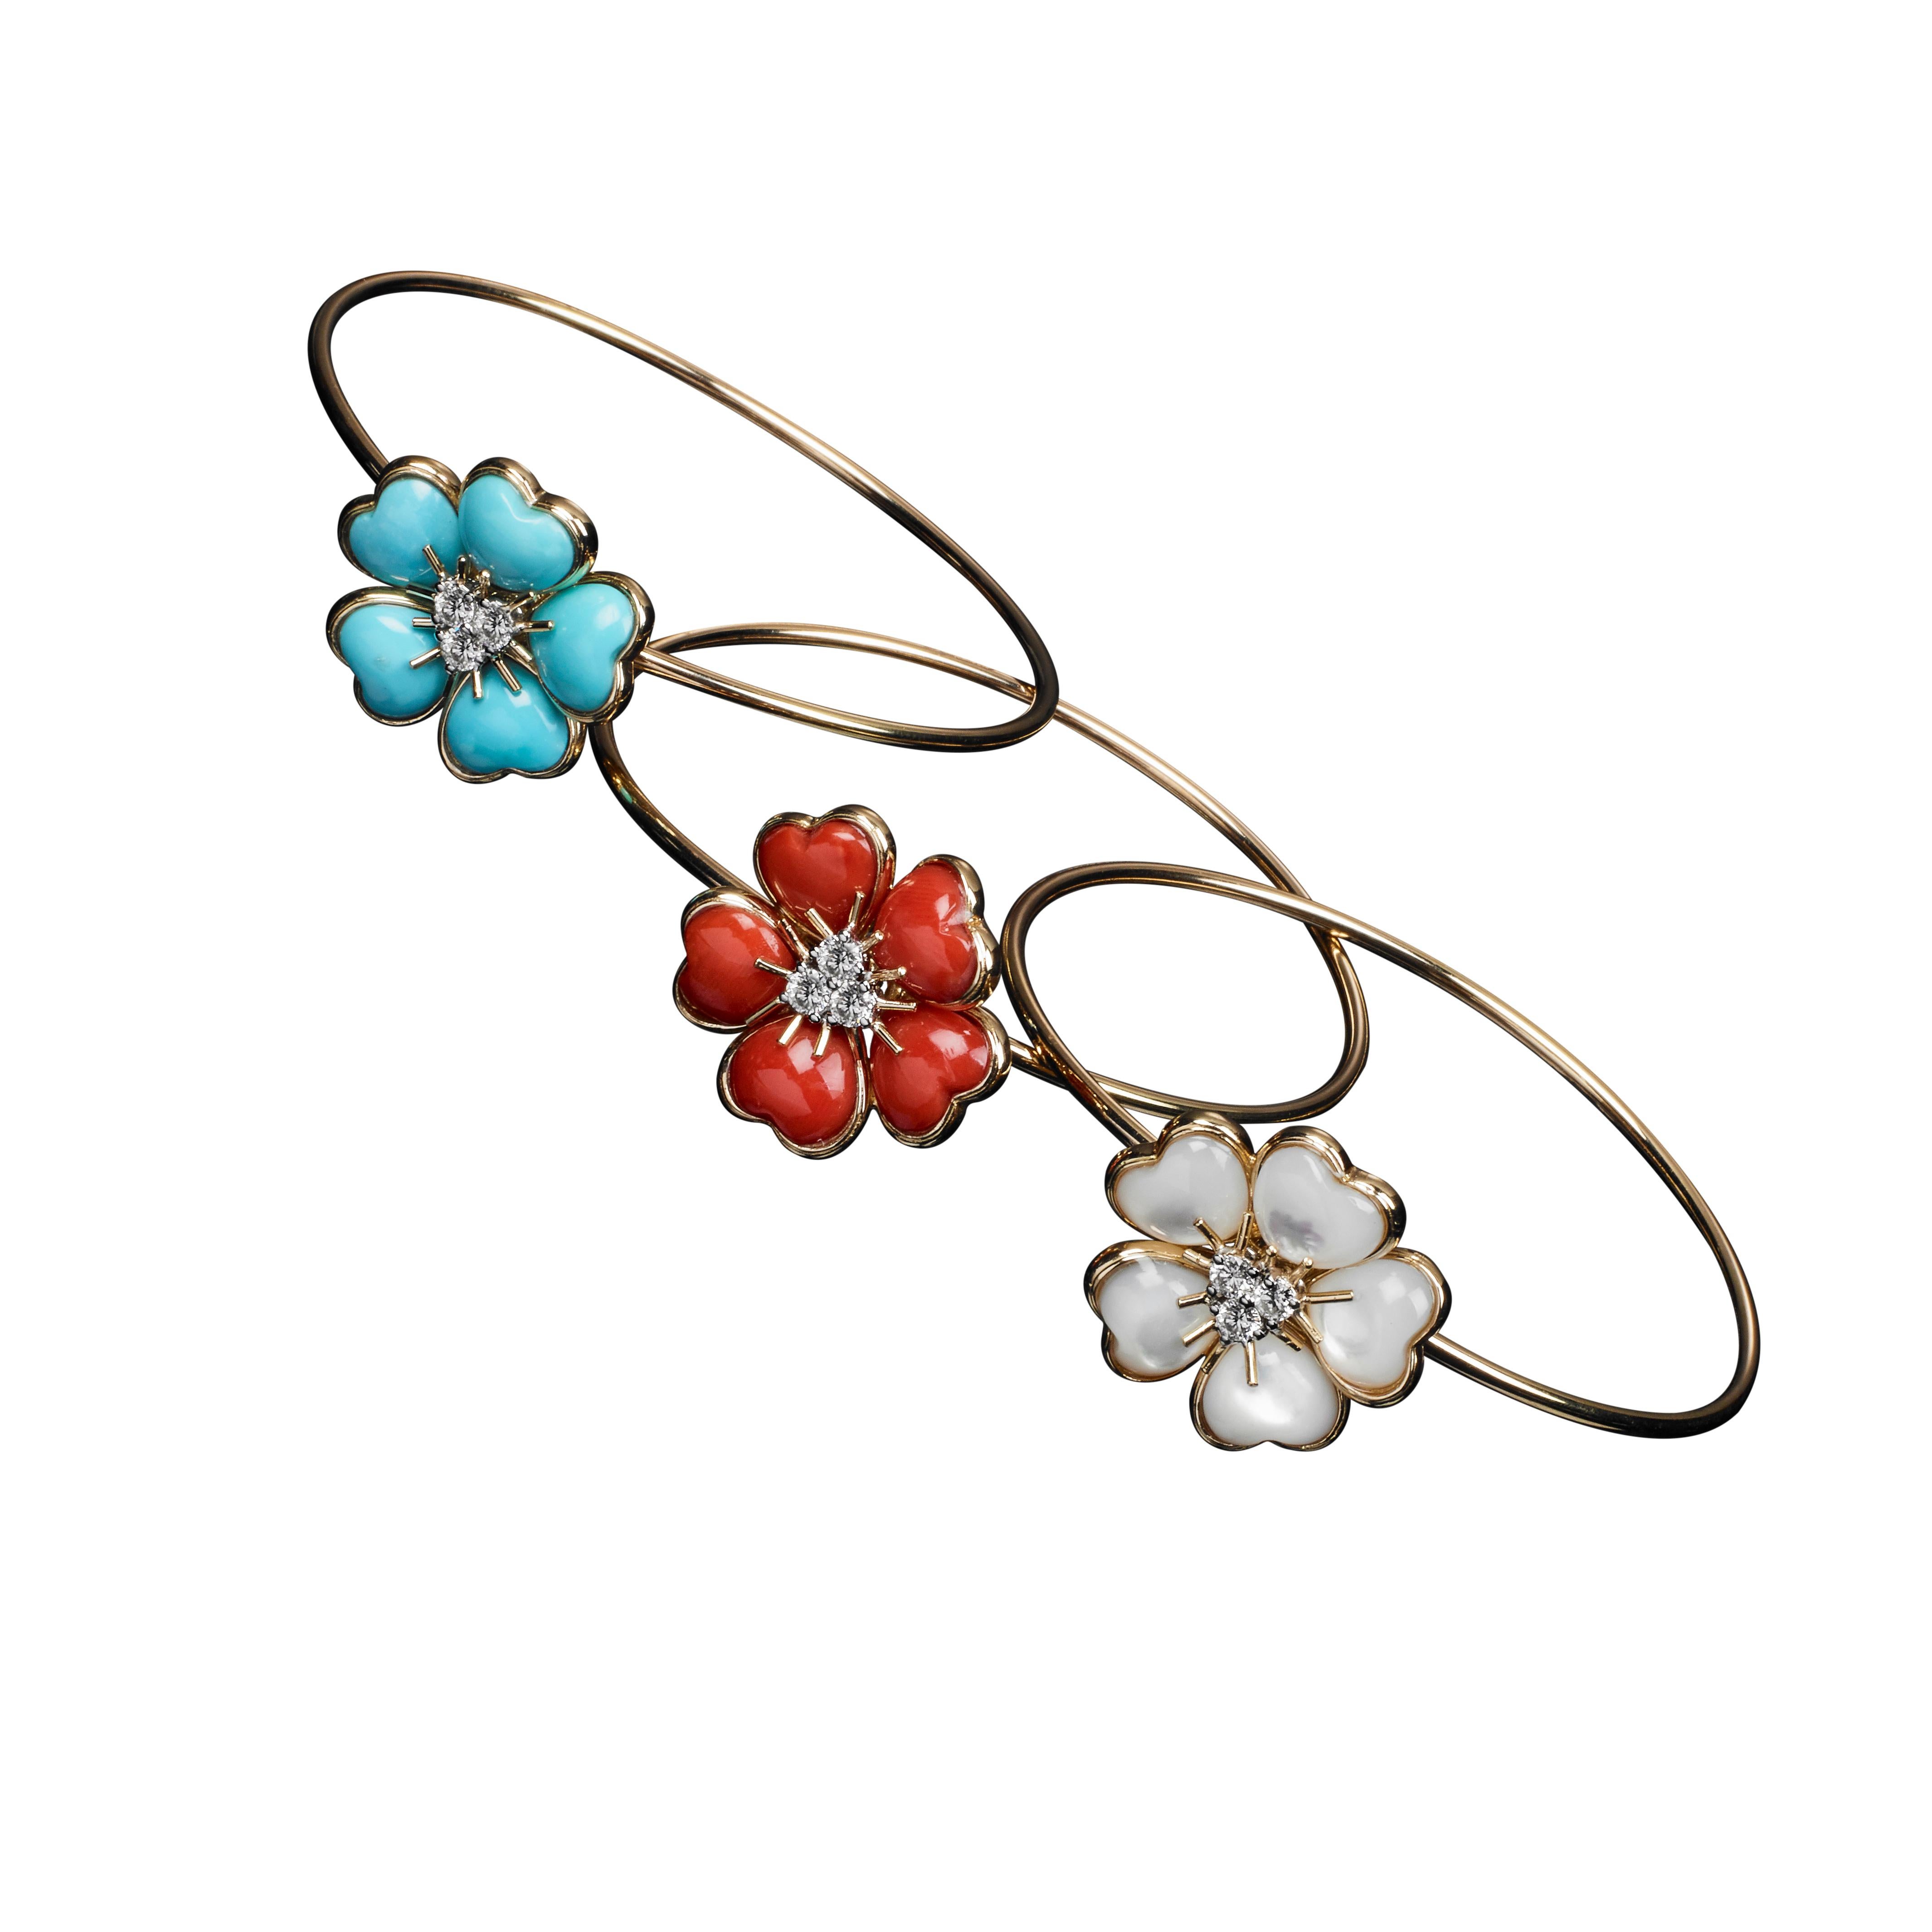 18 kt Yellow Gold Bracelet adorned with a nice and charming central flower featuring Turquoise Inlays, enriched with 0,32 carats of Brilliant-cut Diamonds, G colour, IF clarity.
The bracelet is part of the lovely, multi-coloured, joyful Collection: